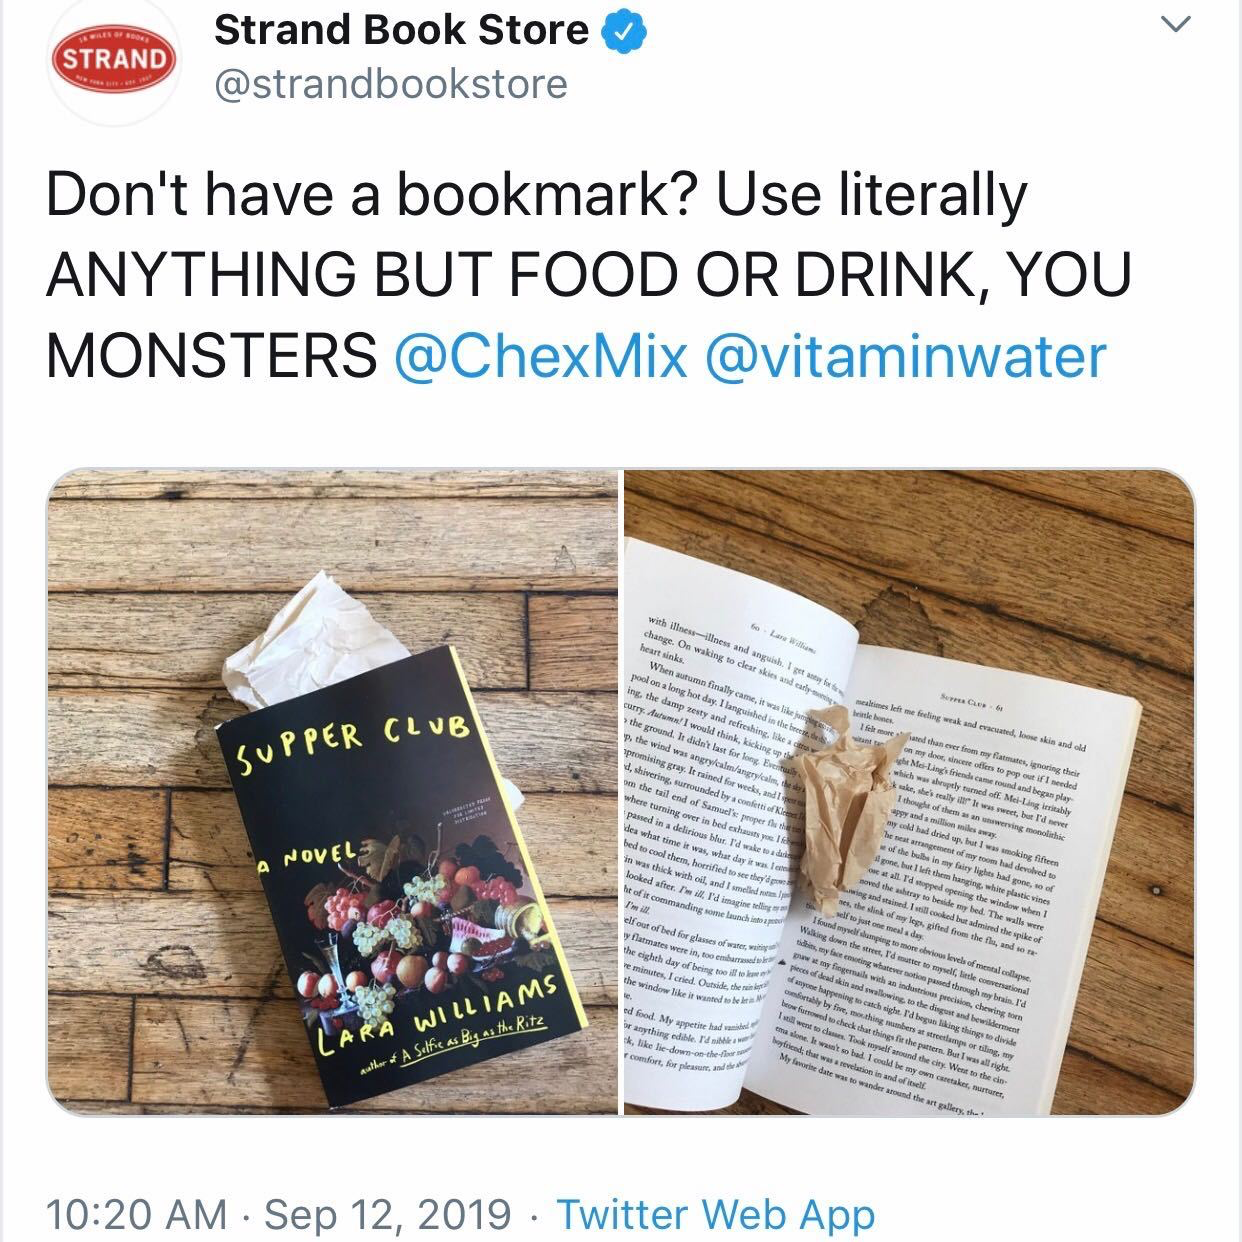 material - Strand Strand Book Store Don't have a bookmark? Use literally Anything But Food Or Drink, You Monsters Mix Supper Club Williams Twitter Web App